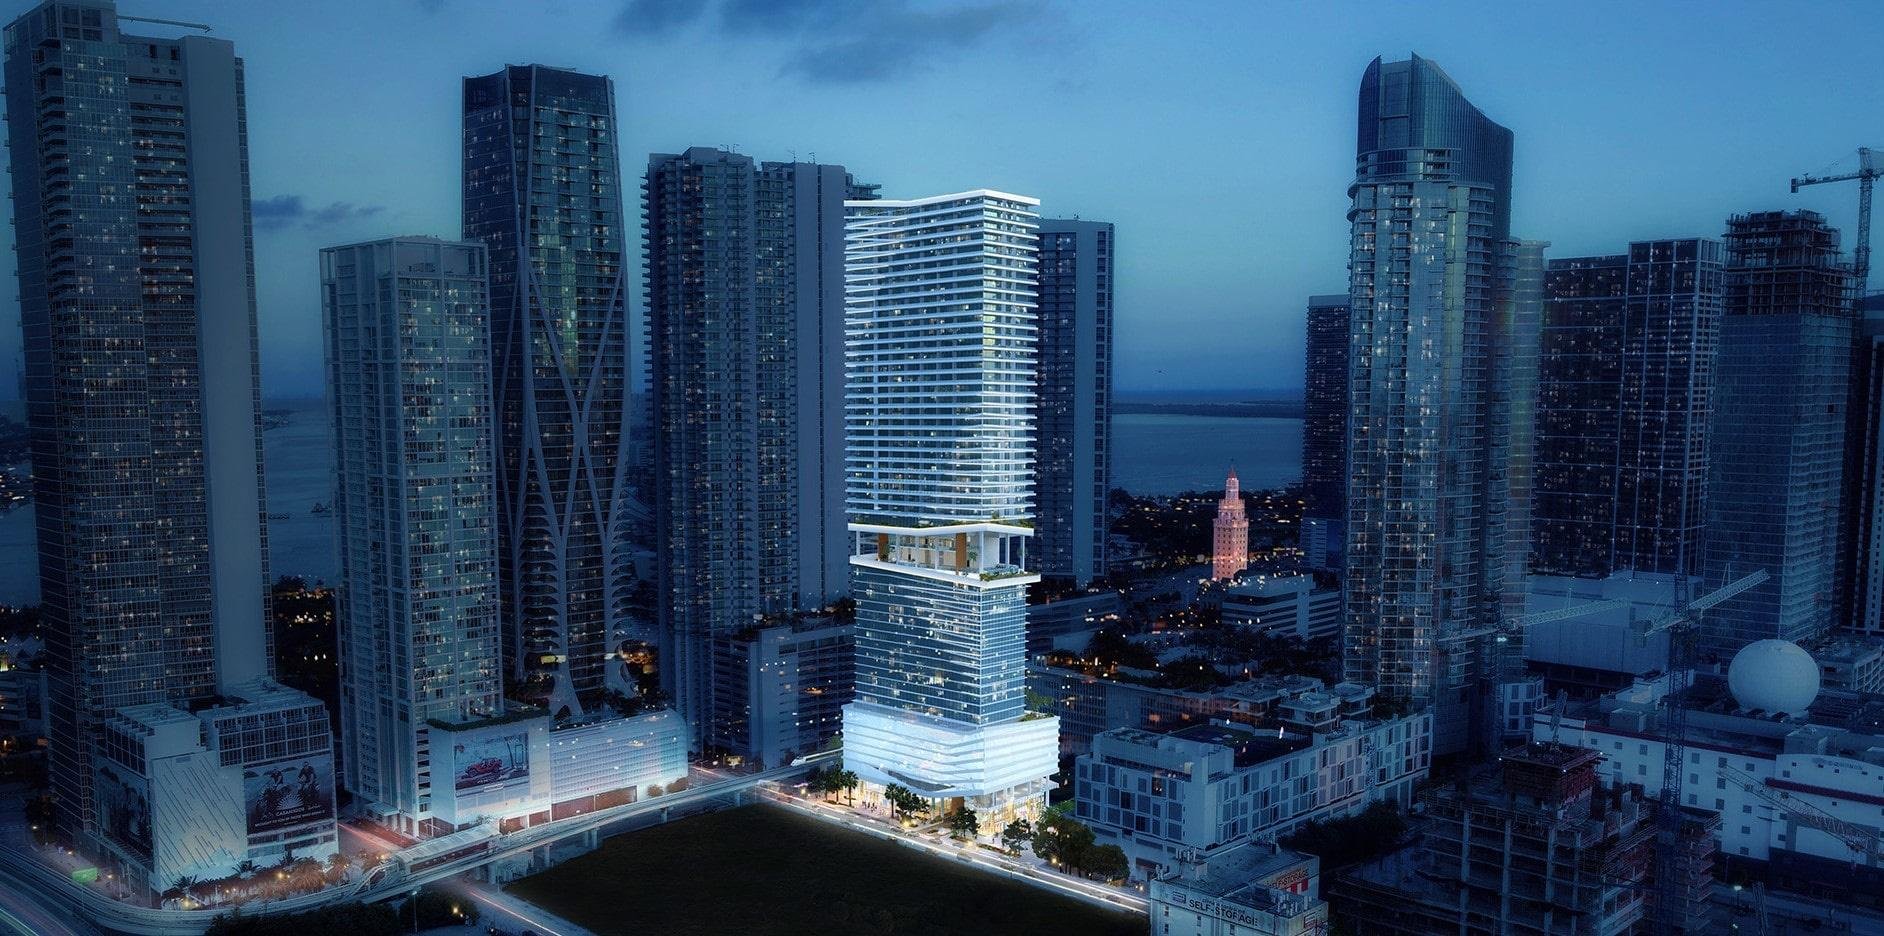 Apple Store And Mixed-Use Tower Coming To Miami Worldcenter in Downtown Miami 4.jpeg